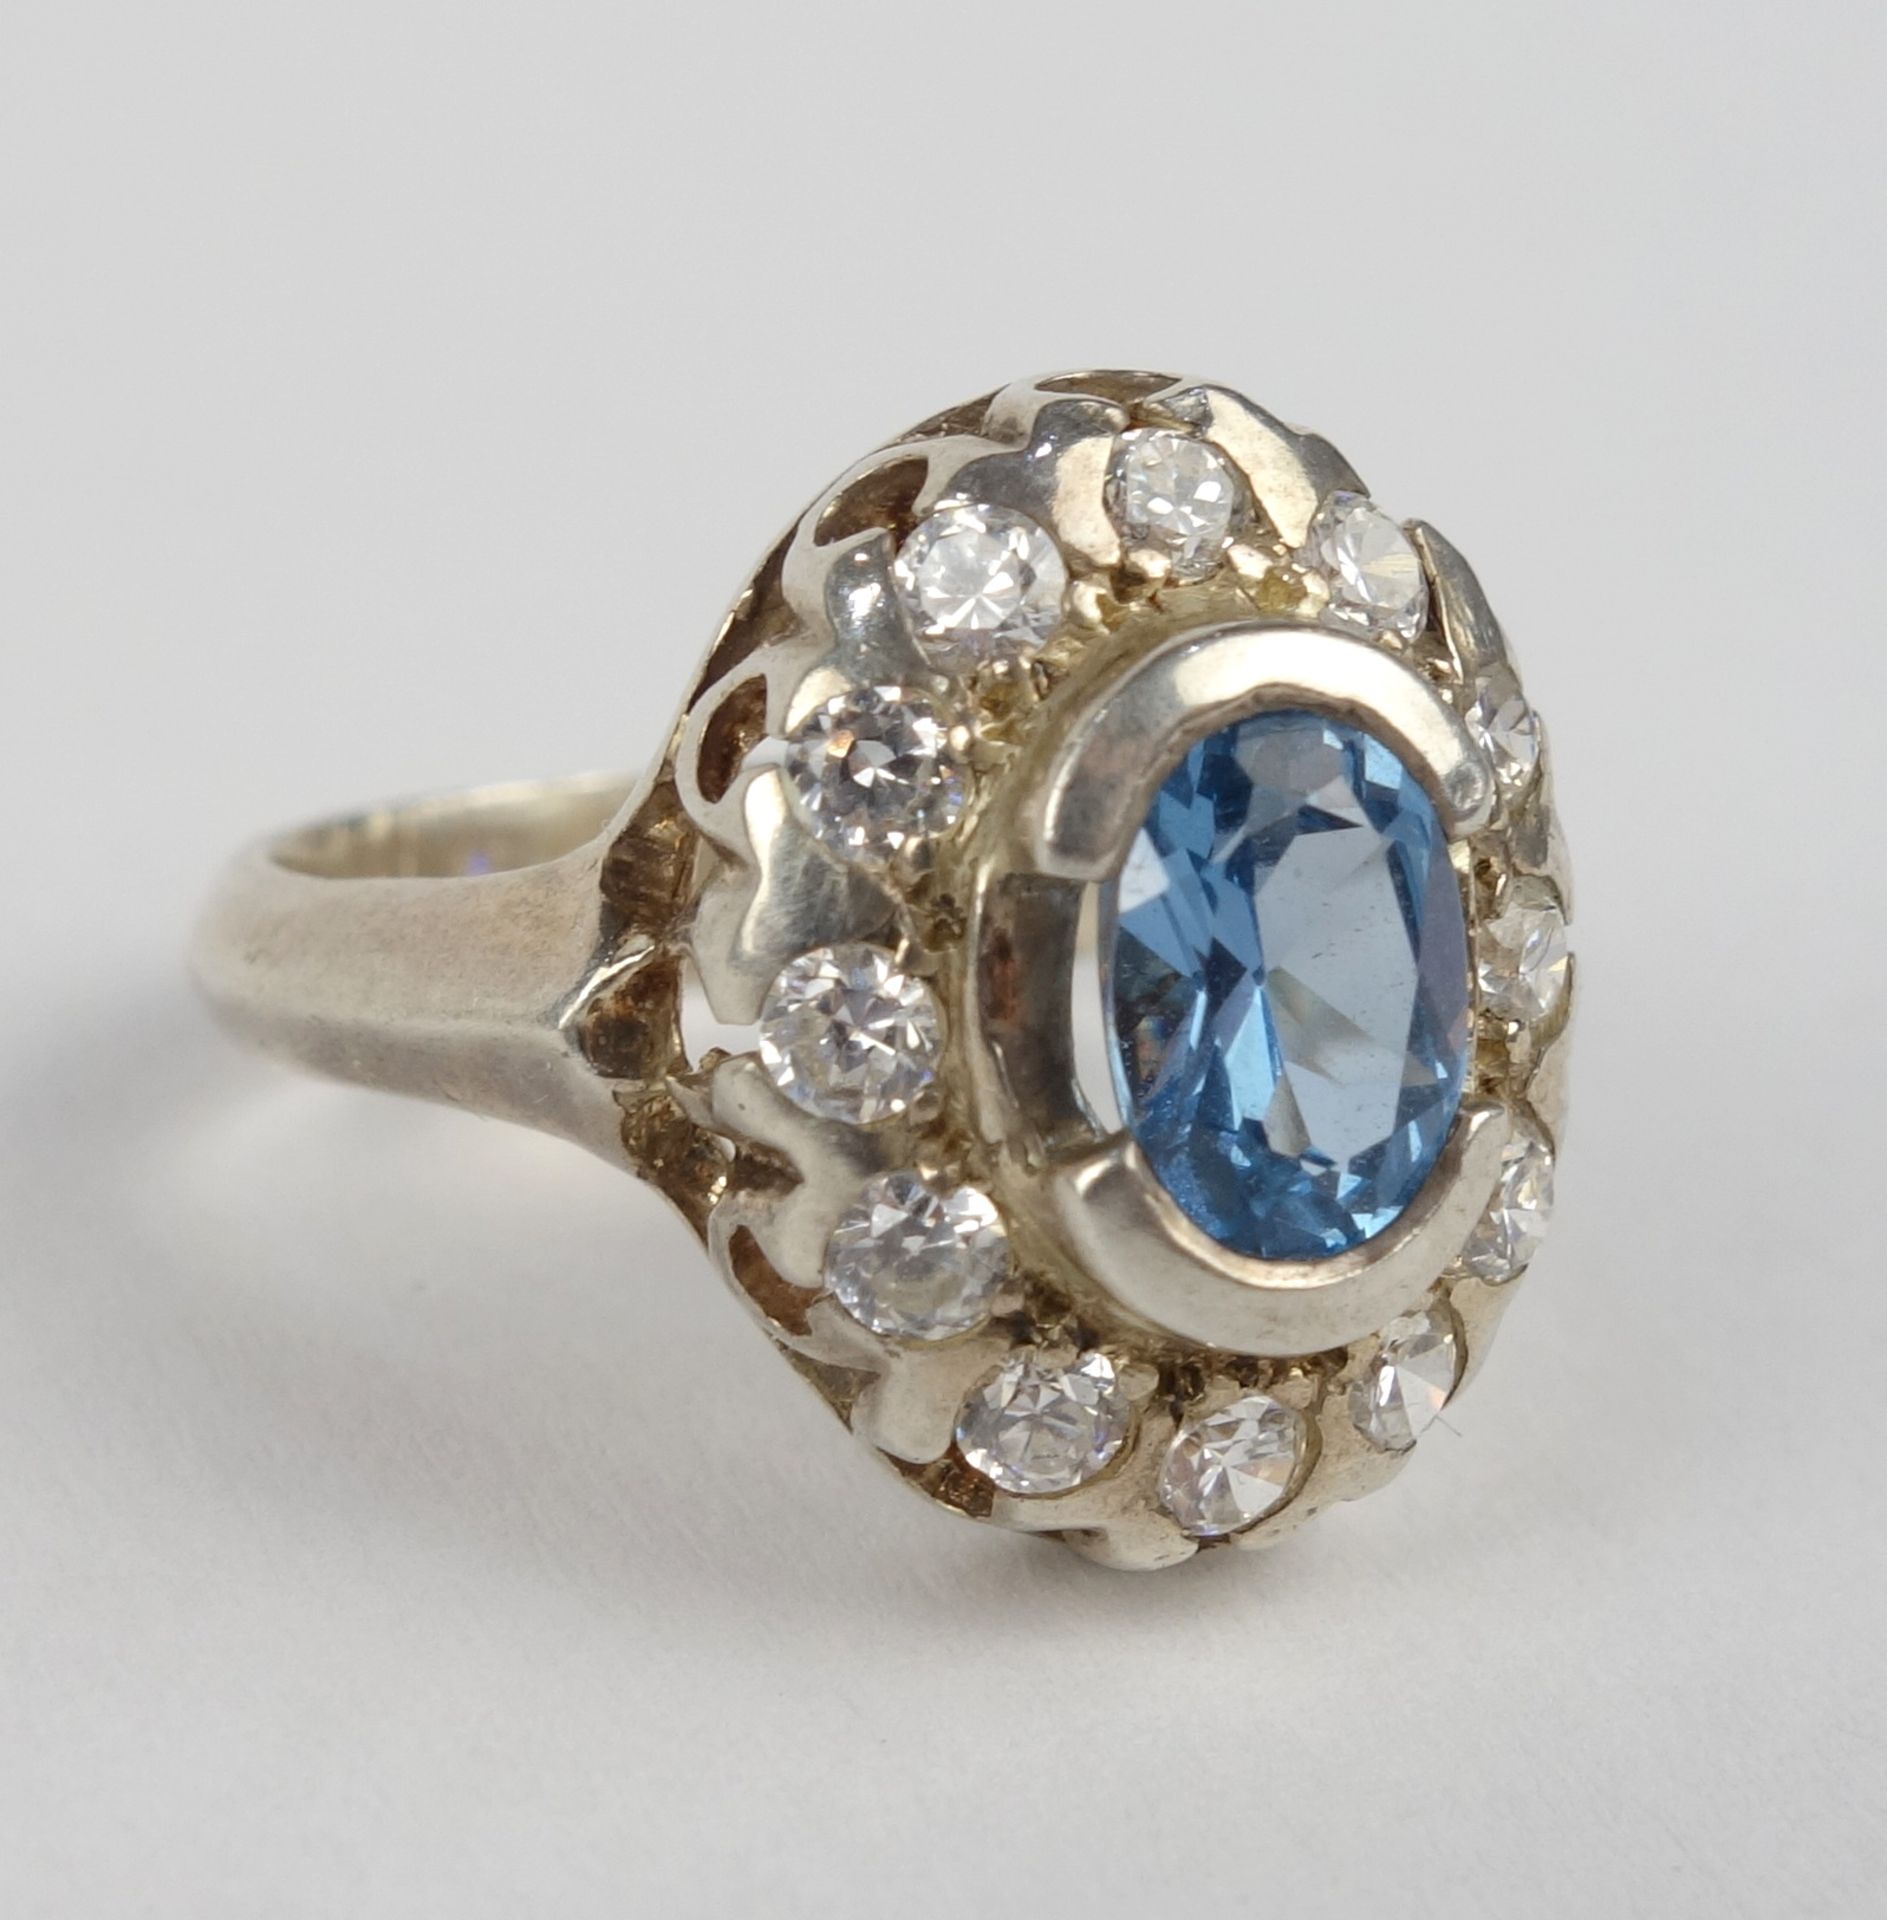 Ring with light blue stone and zirconias, 925 silver, w.4,90g - Image 2 of 2